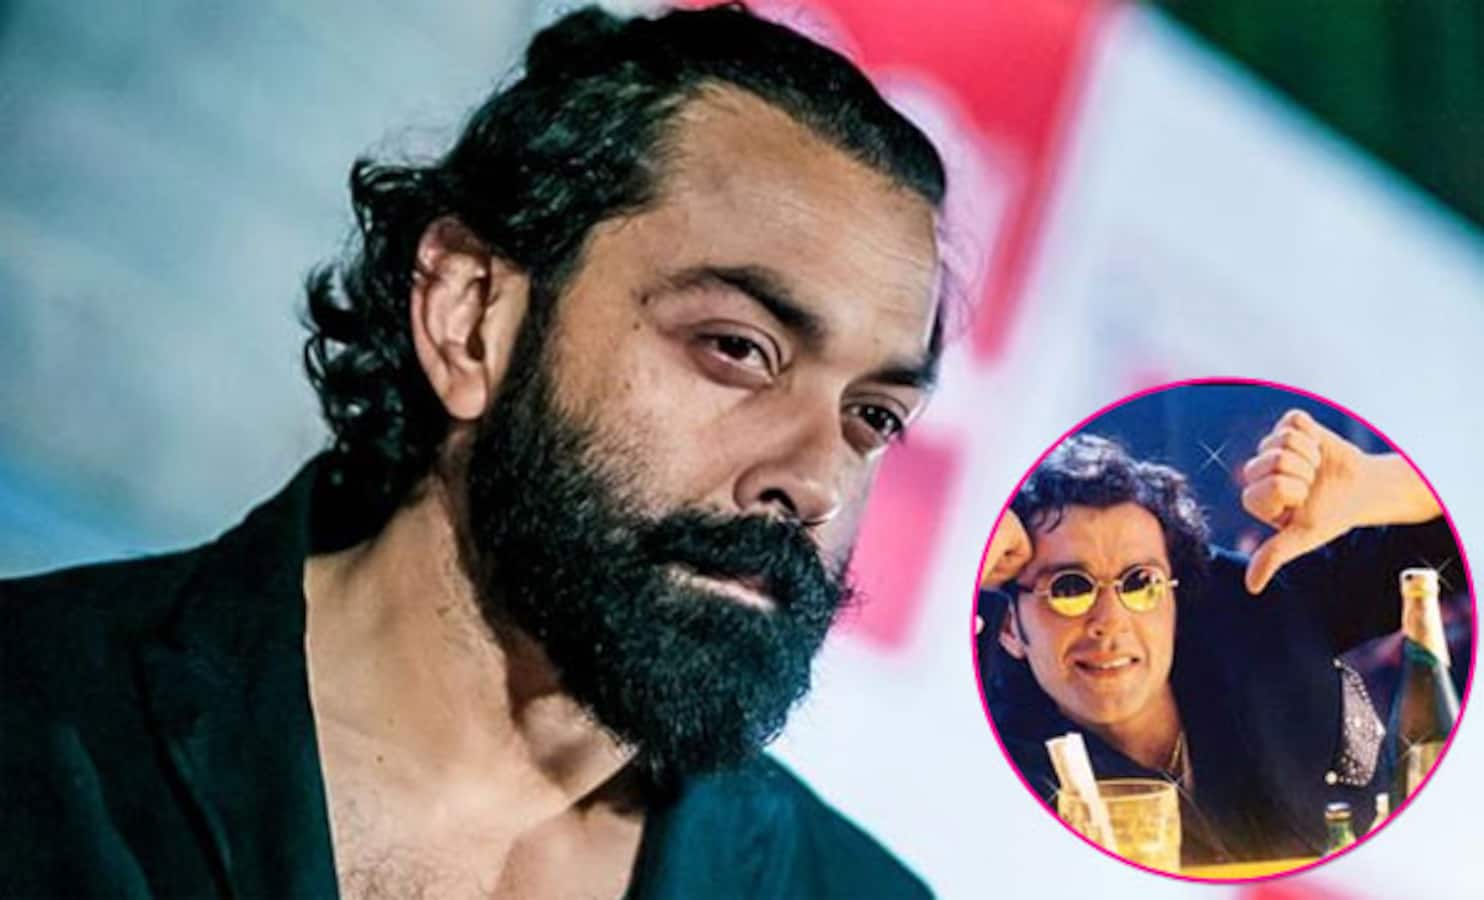 DJ Bobby Deol's Gupt trance gives trolls an opportunity for CRAZILY FUNNY Tweets!